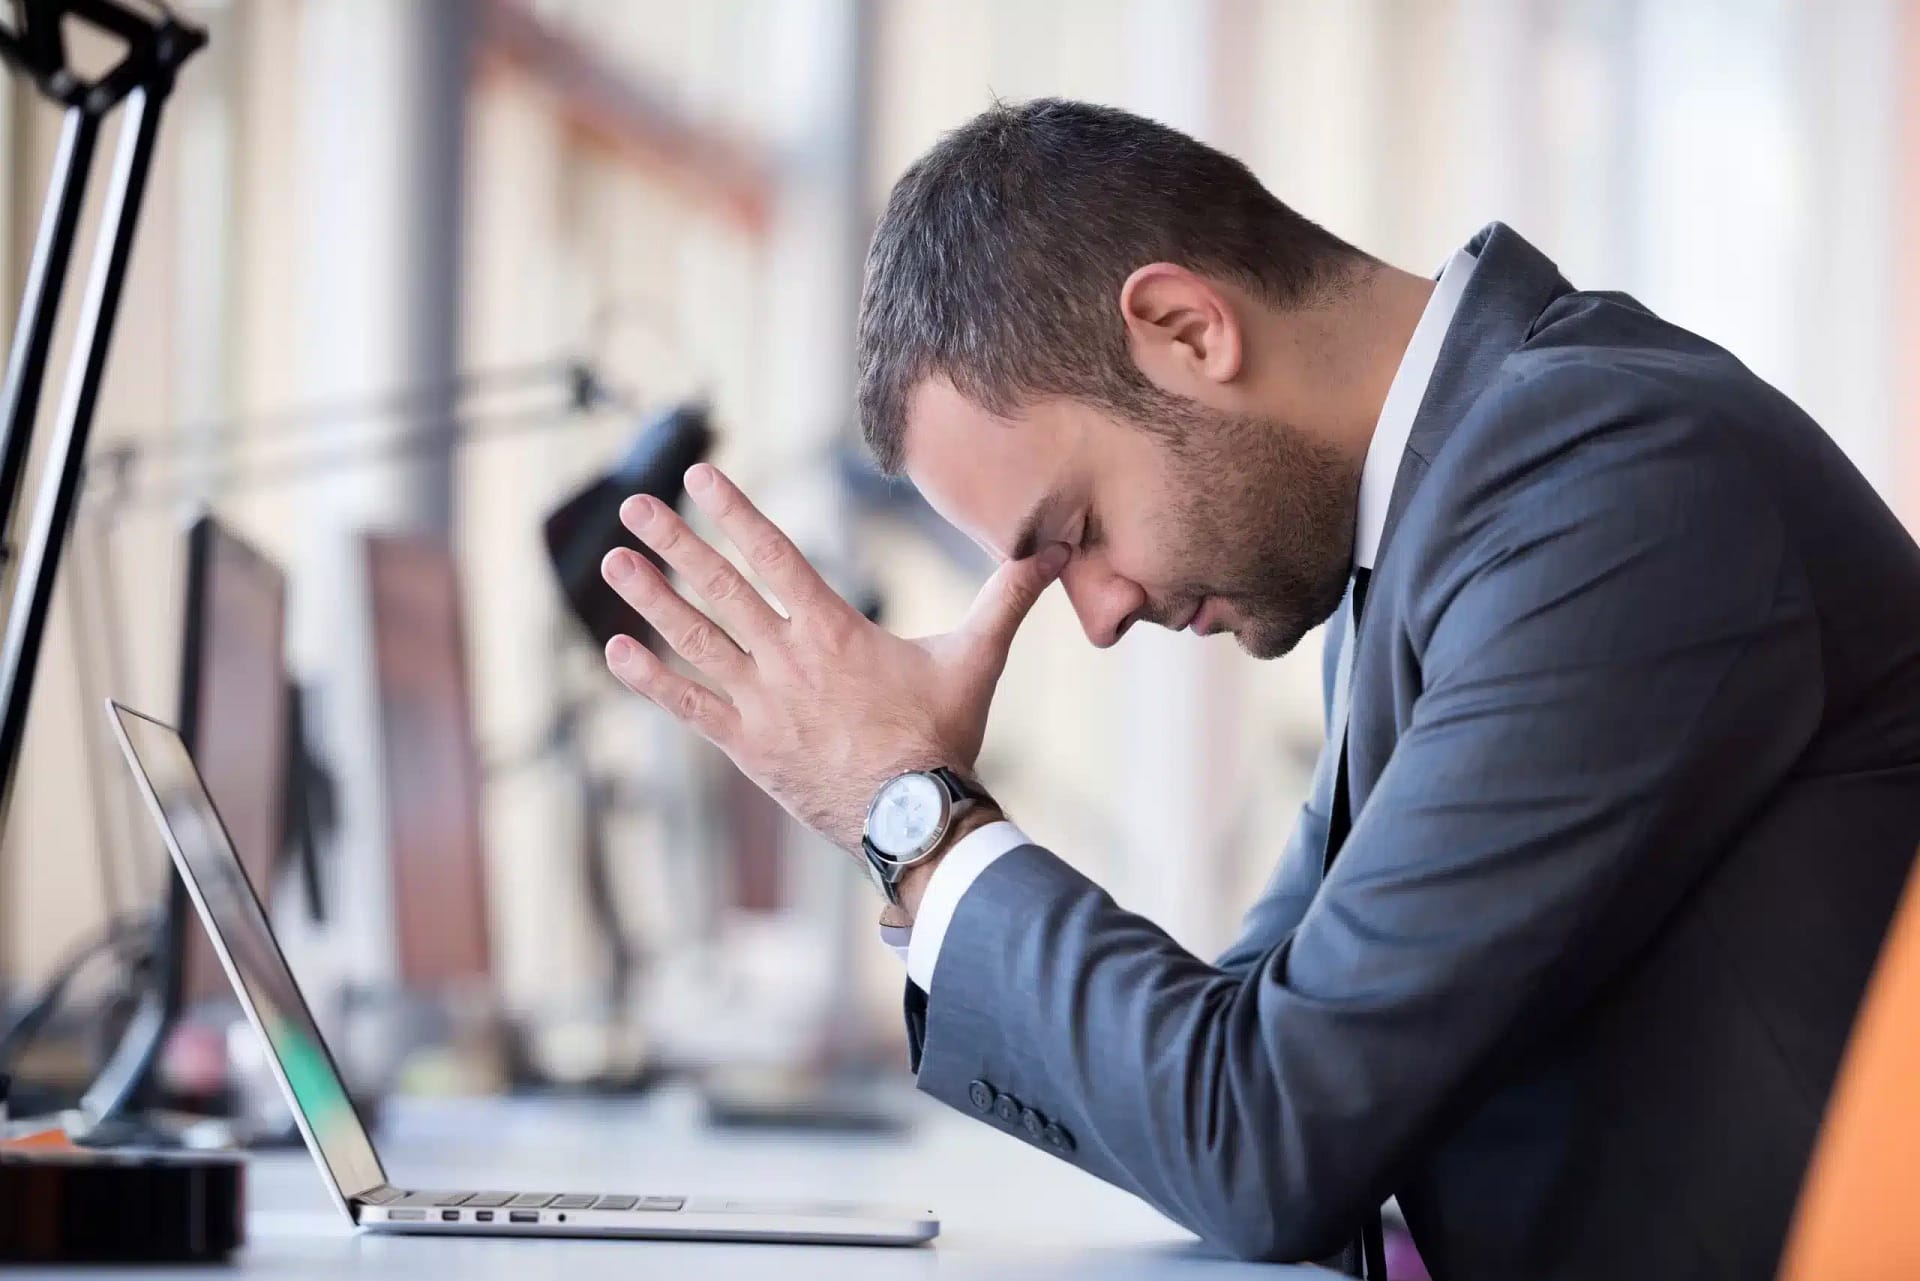 A man in a suit is holding his head in front of his laptop.